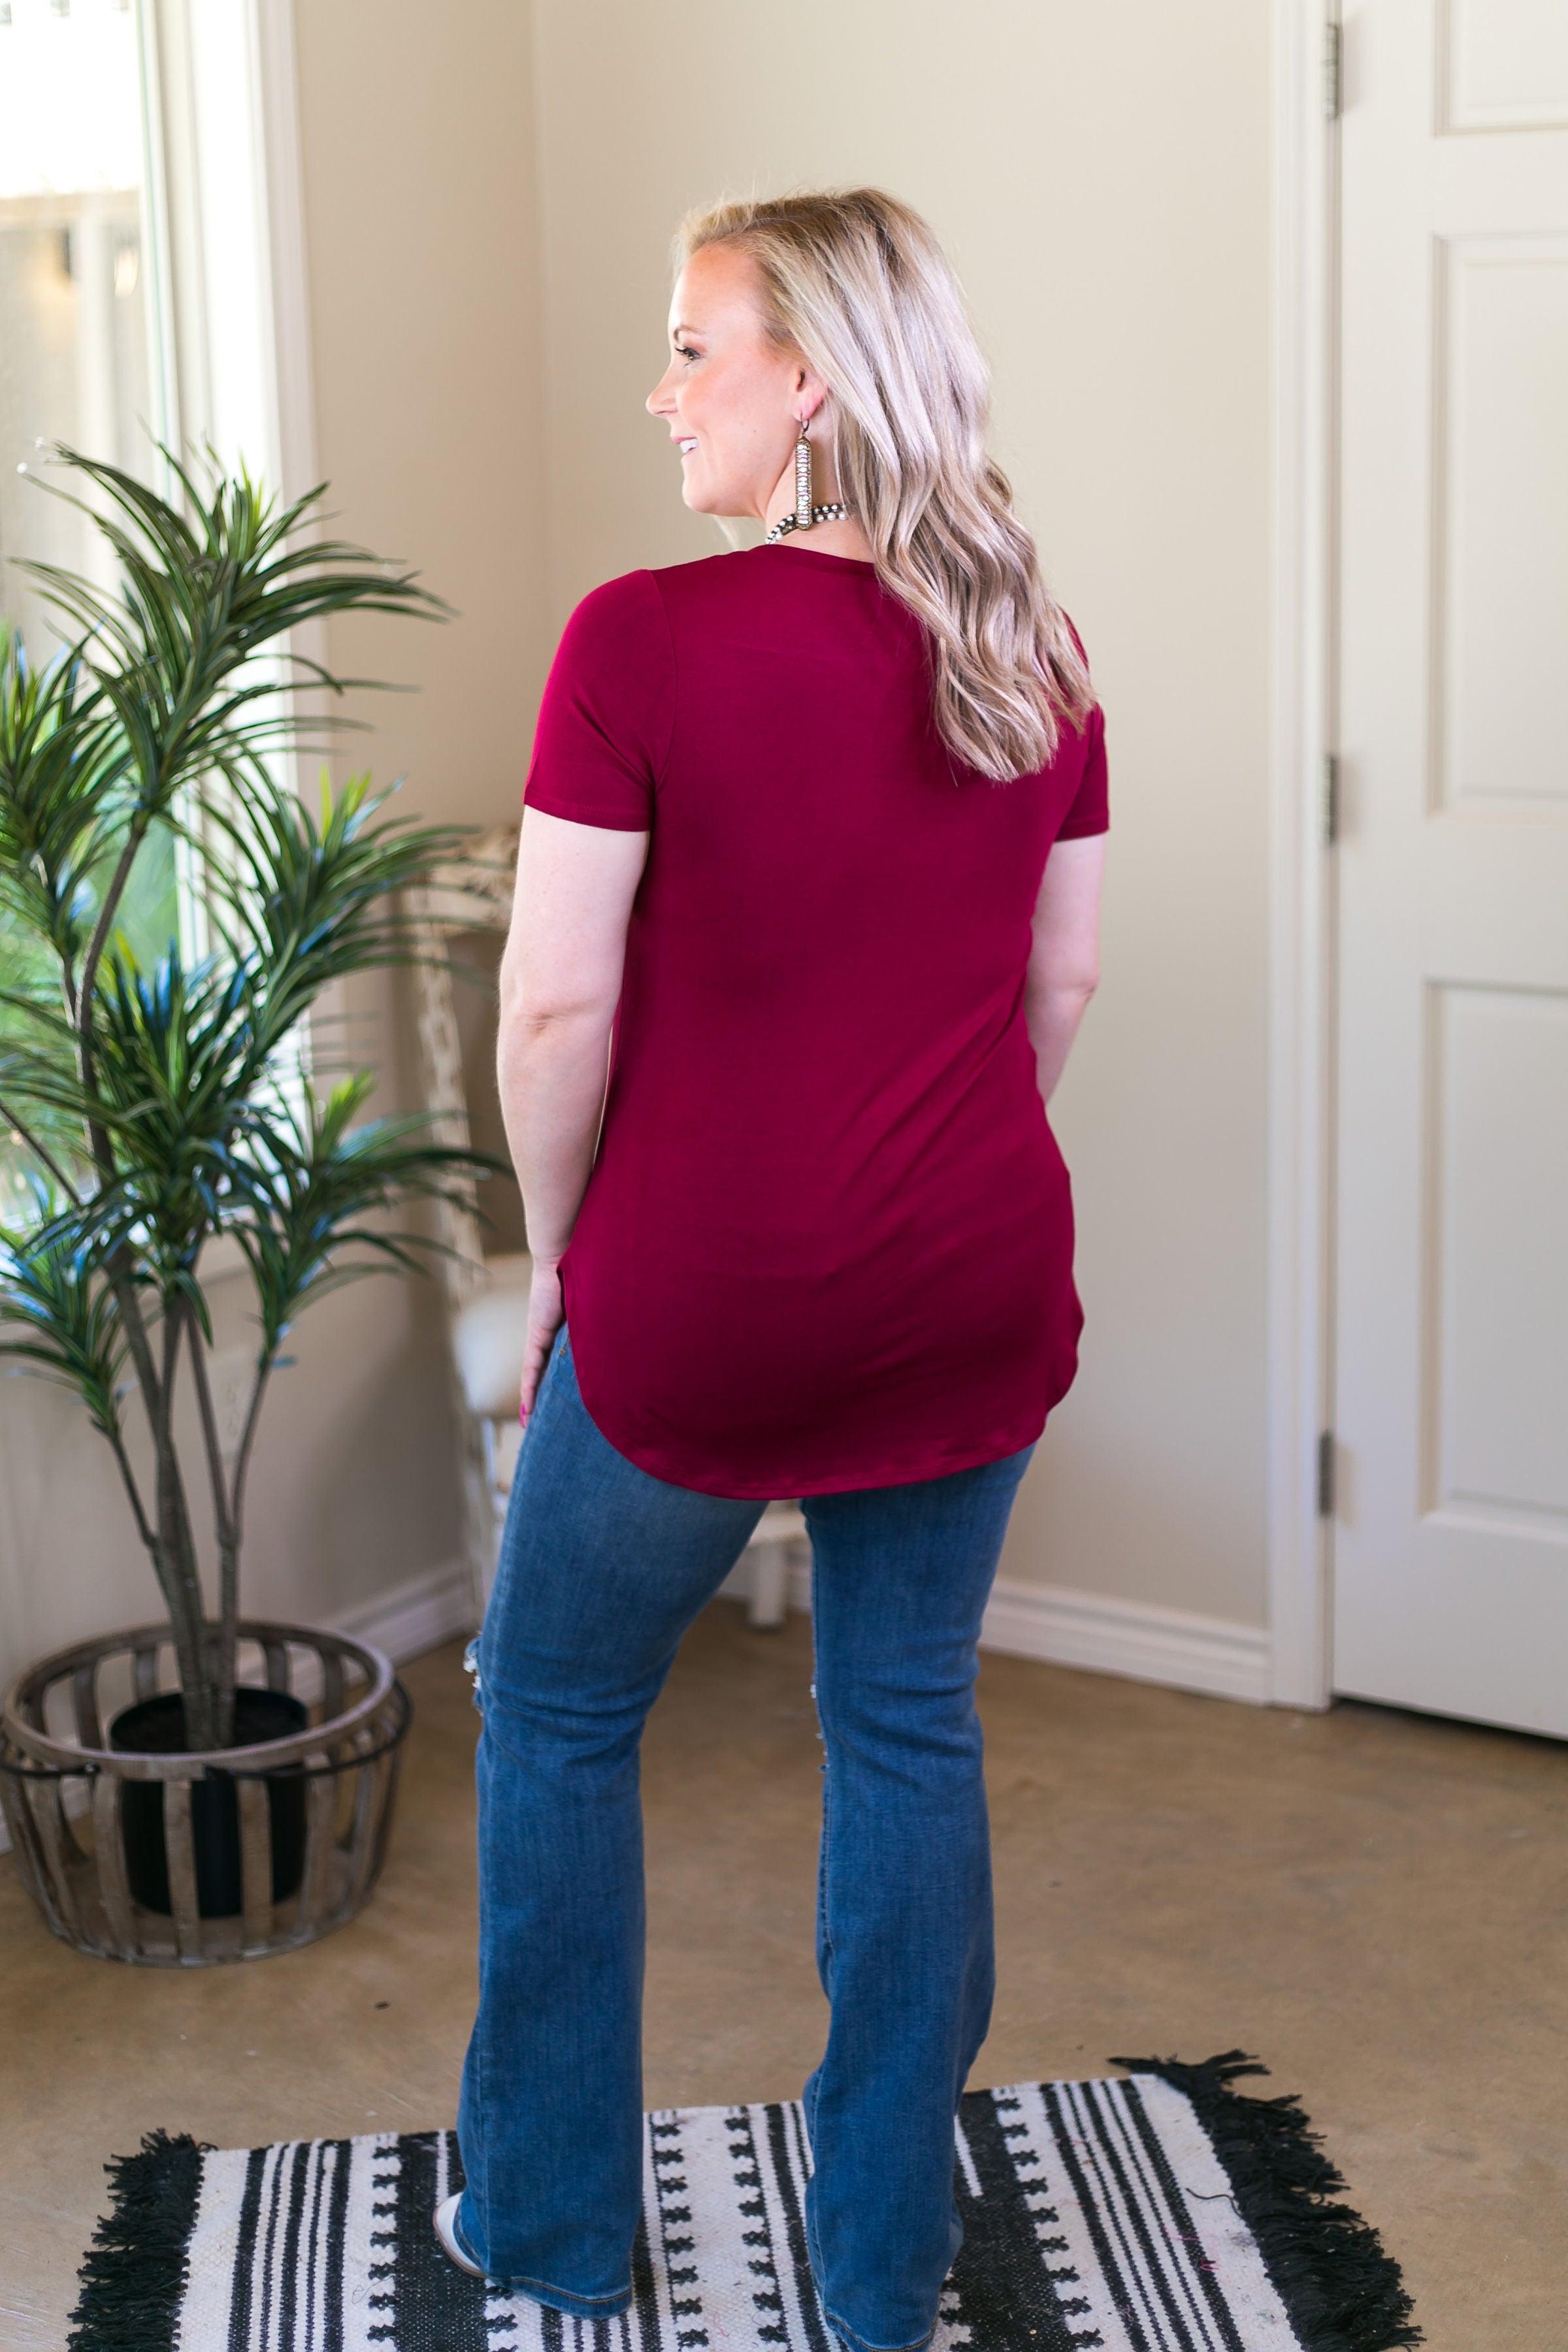 Simply The Best V Neck Short Sleeve Tee Shirt in Maroon - Giddy Up Glamour Boutique